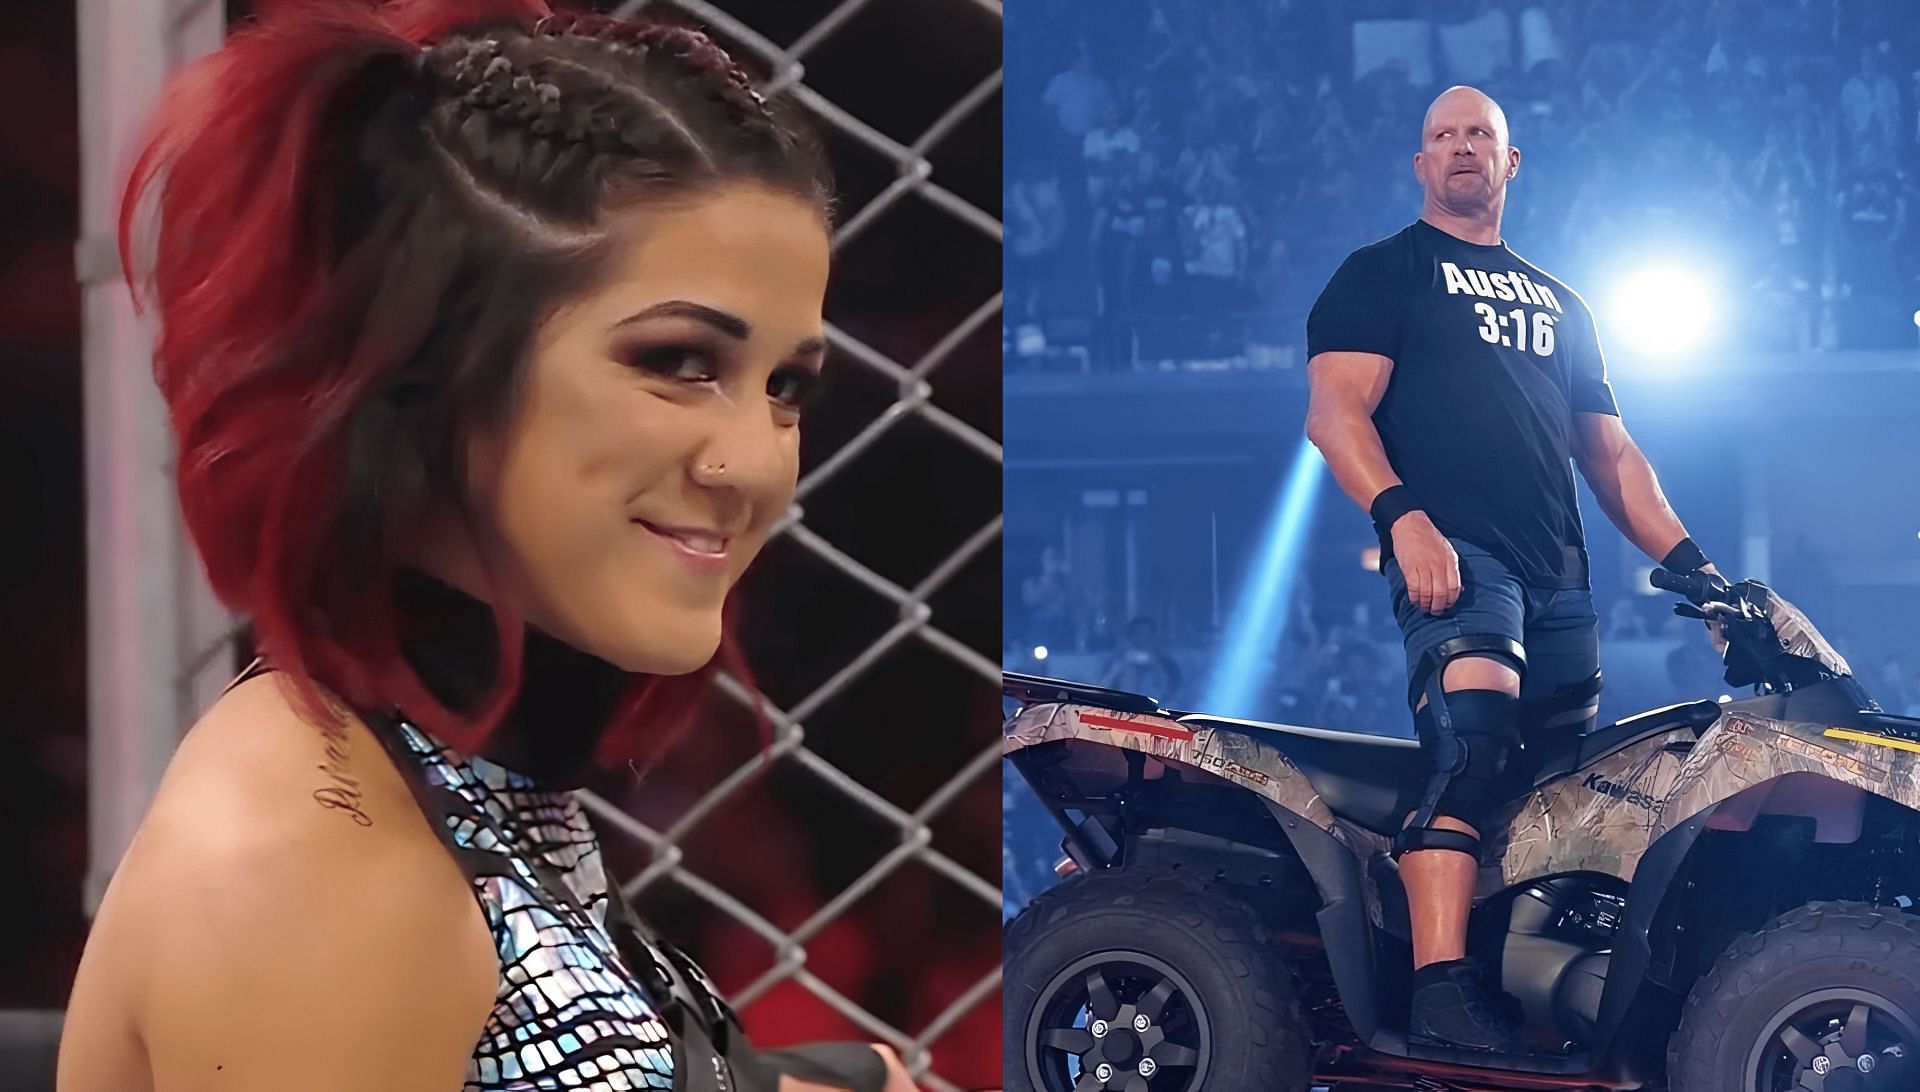 Bayley(left) and &quot;Stone Cold&quot; Steve Austin(right)